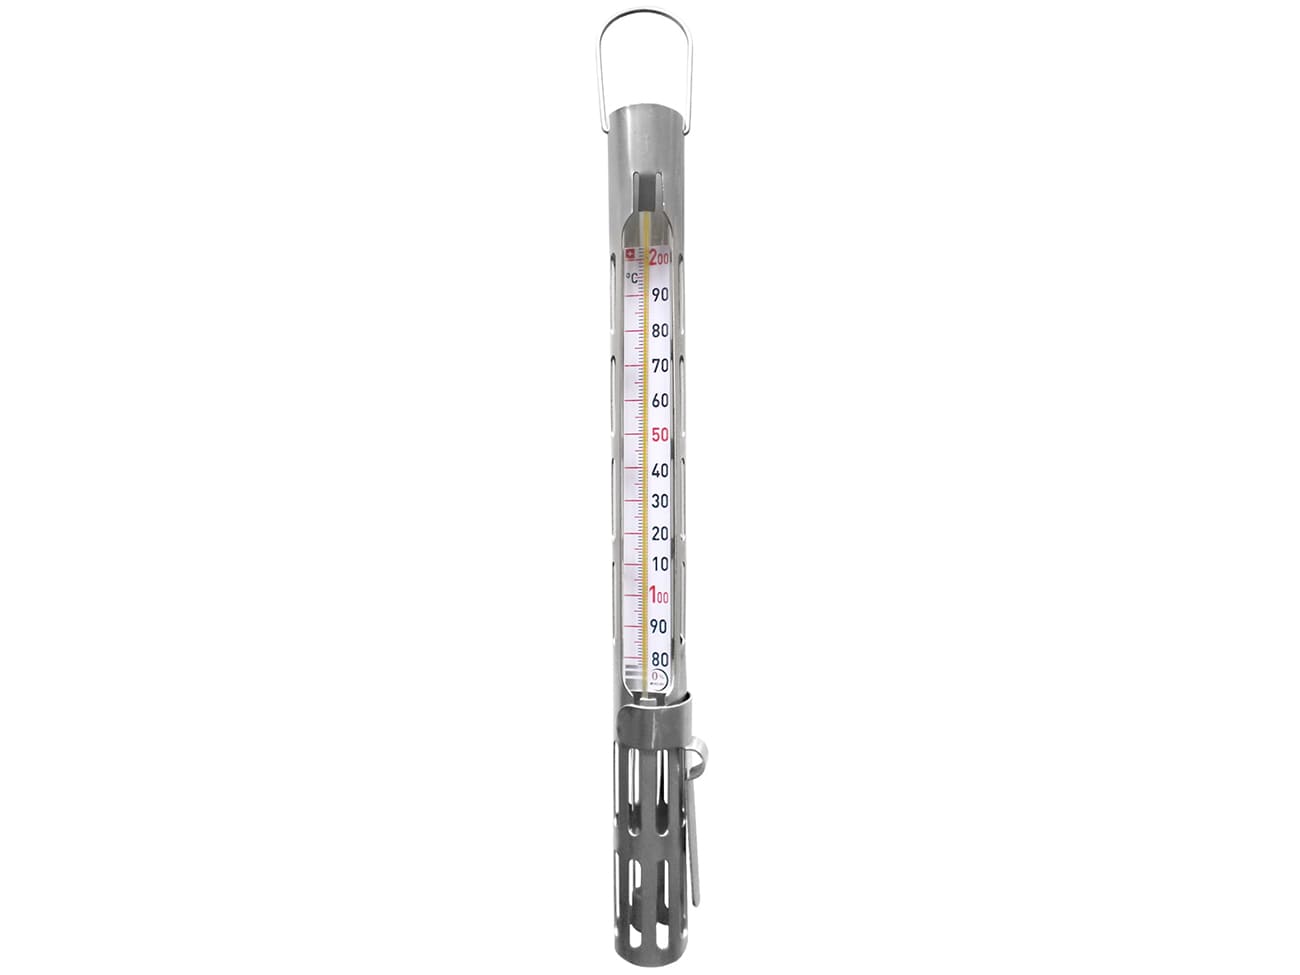 https://files.meilleurduchef.com/mdc/photo/product/all/sugar-thermometer/sugar-thermometer-1-main-1300.jpg